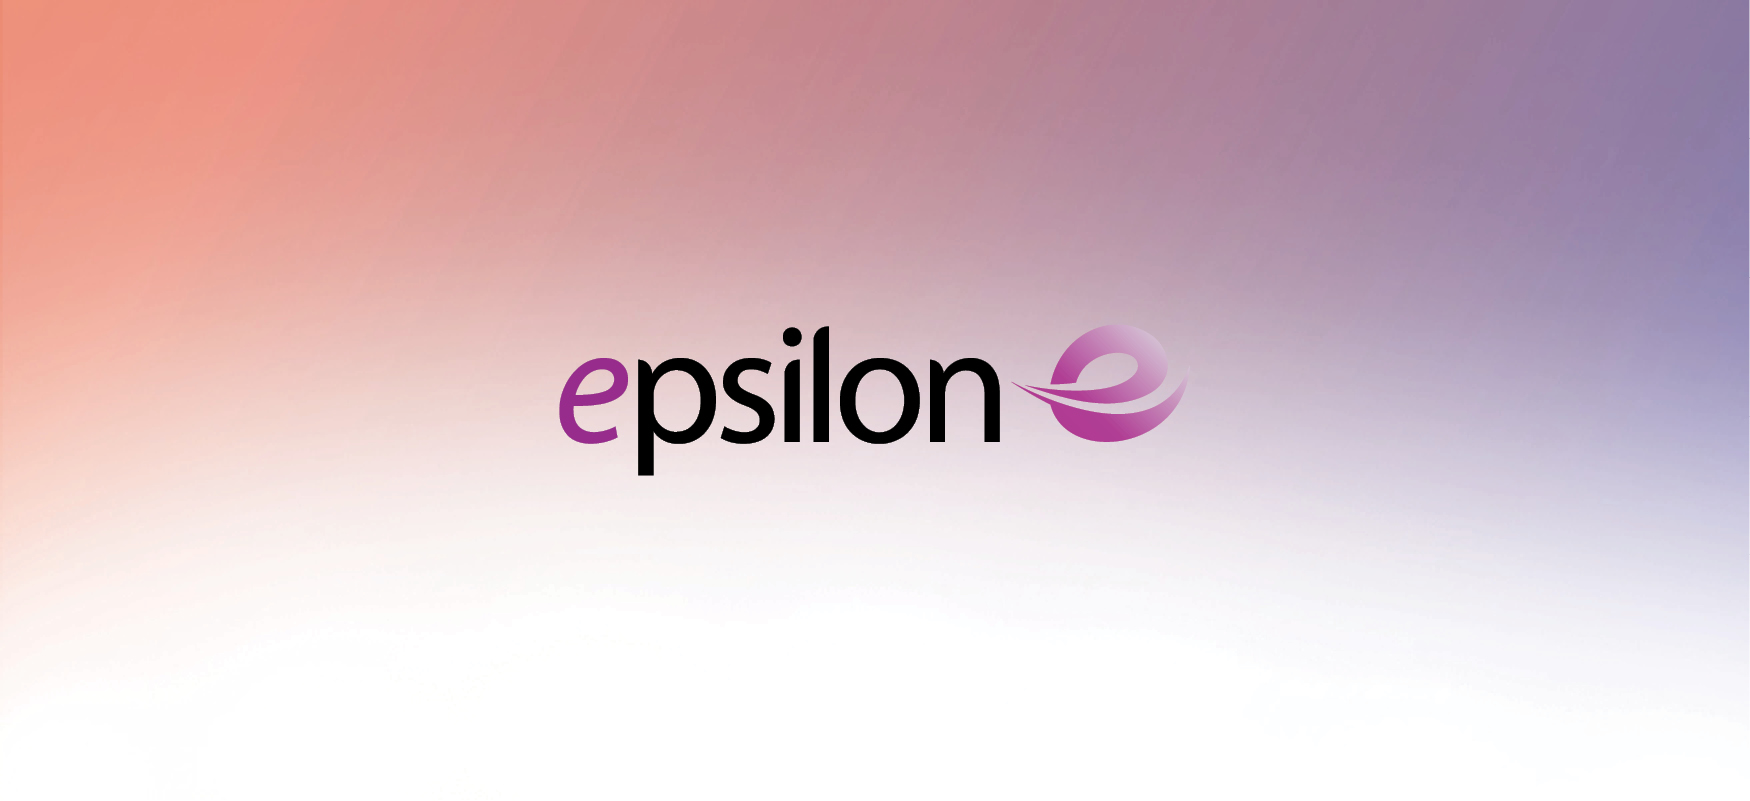 Epsilon Upgrades its Global Network to Deliver – 100G Services On-Demand